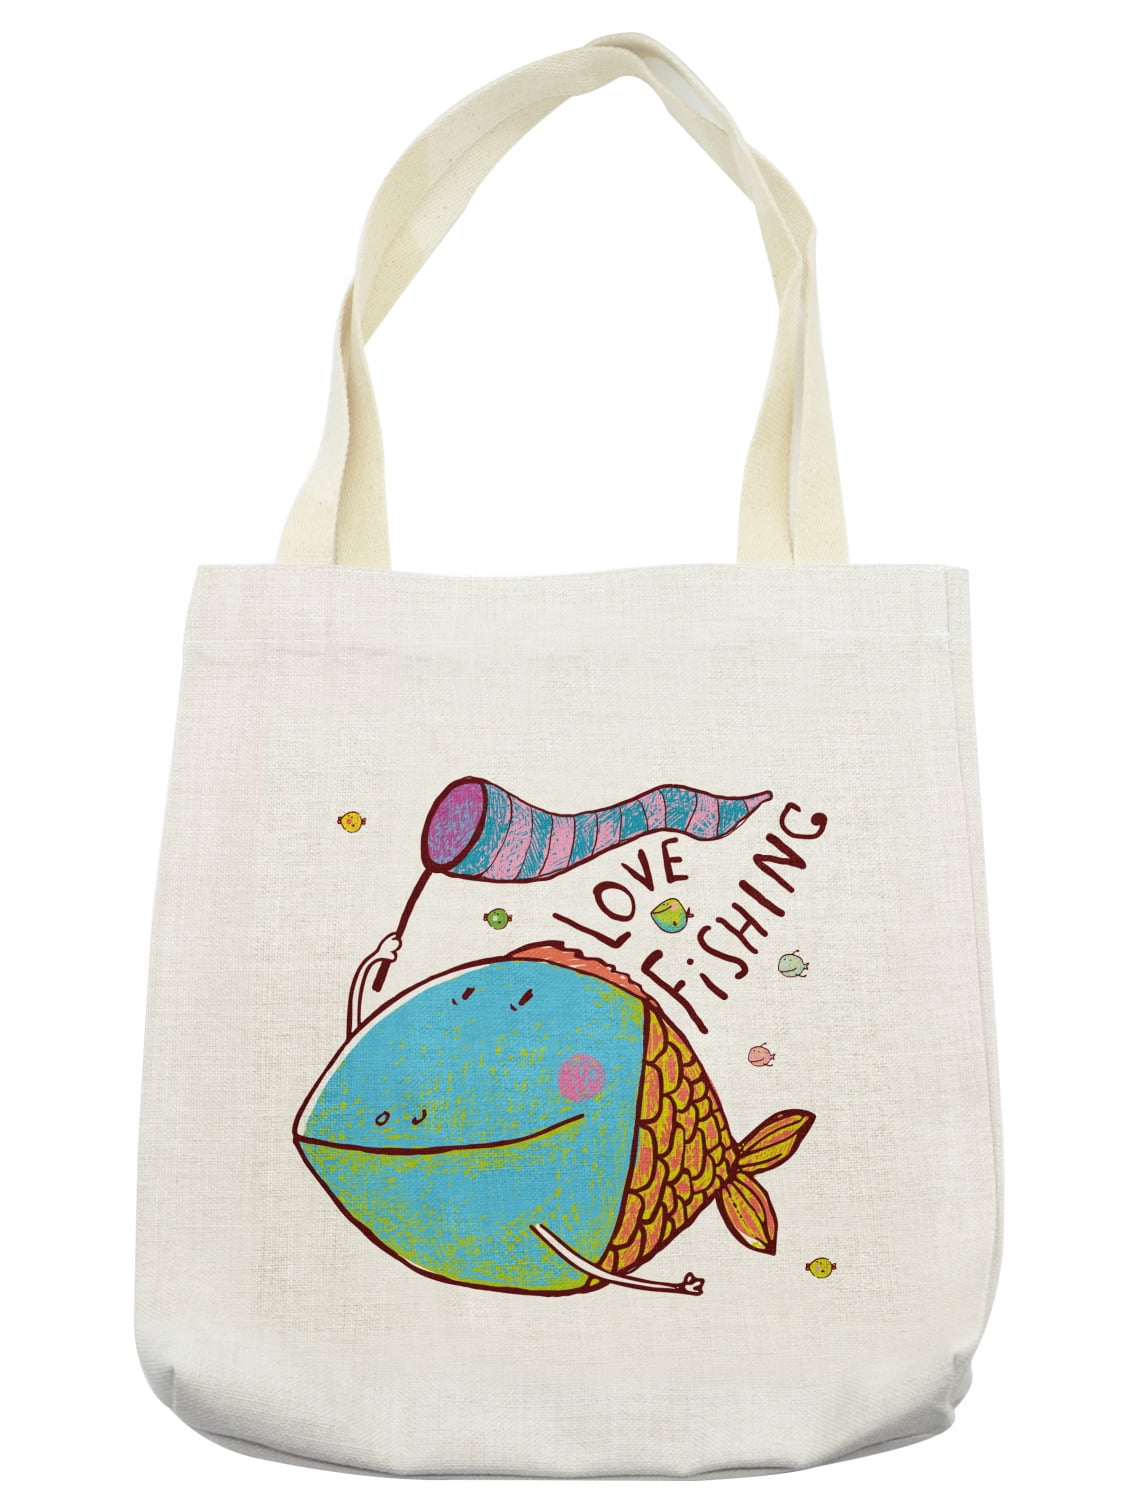 Fishing Tote Bag, Large Fat Fish Holding a Flag with Love Words